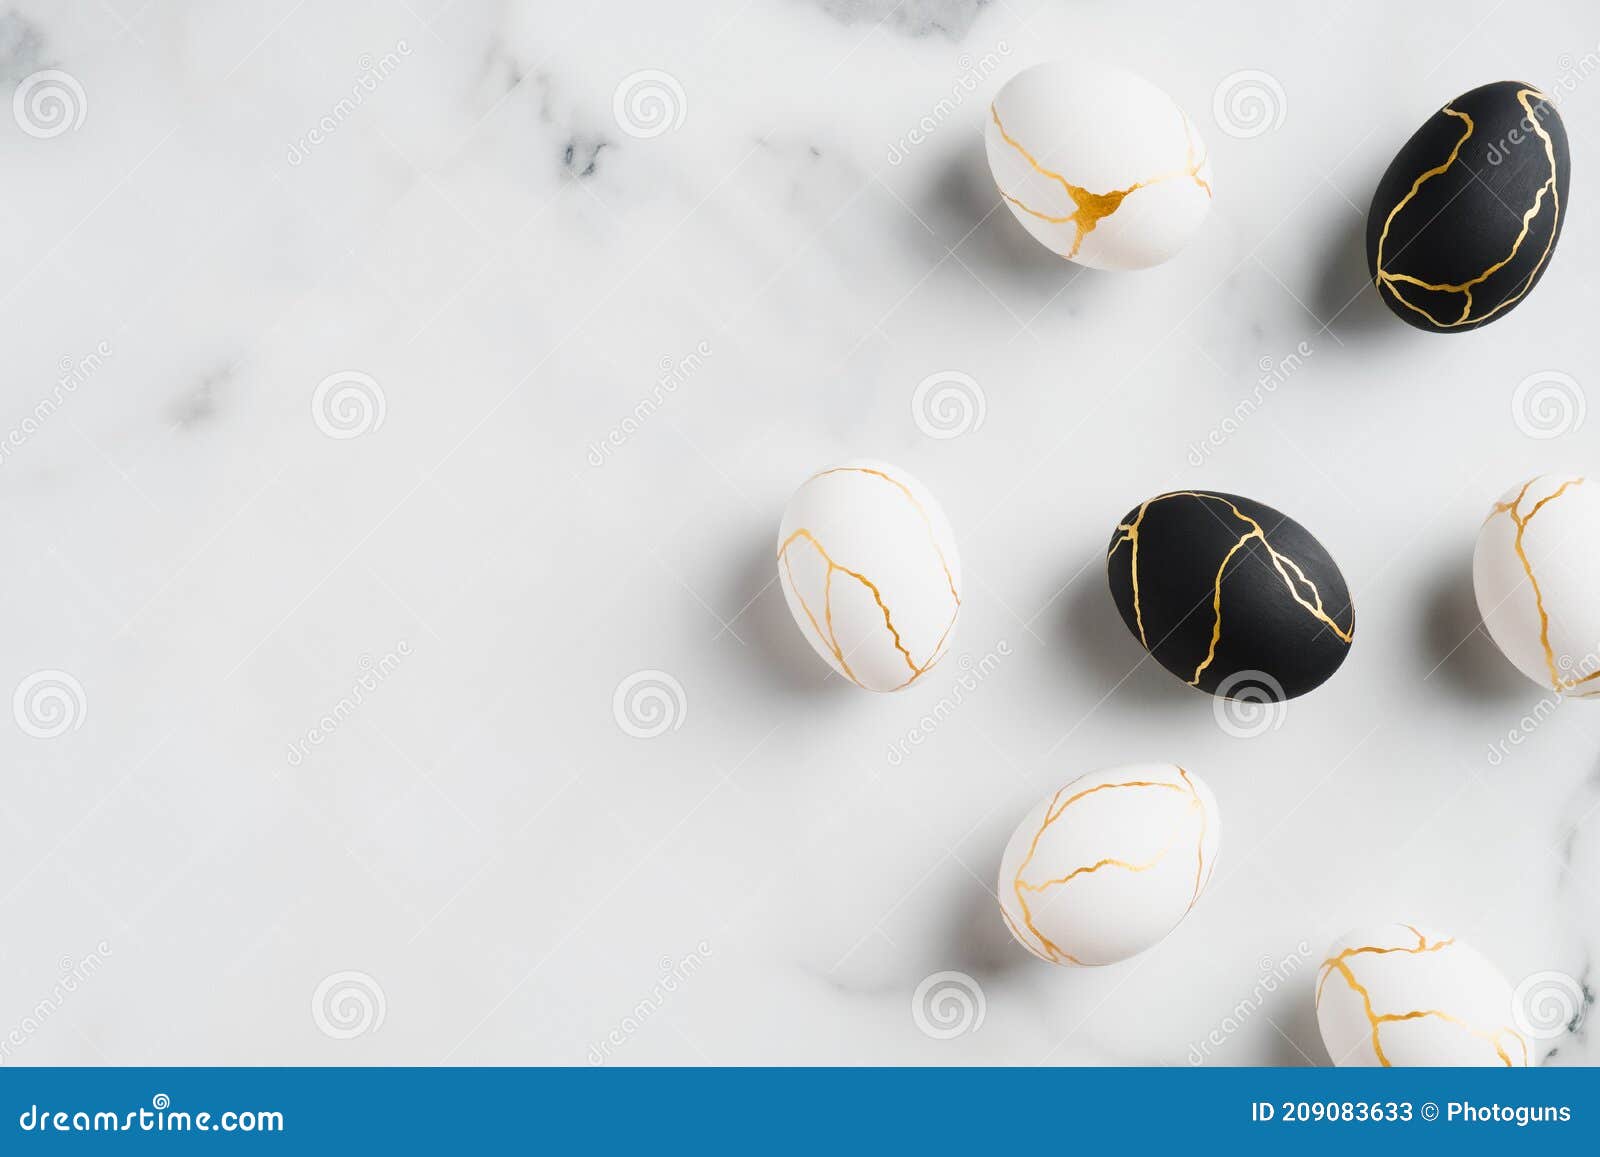 Elegant Easter Eggs Decorated with Gold on Marble Background. Stock ...